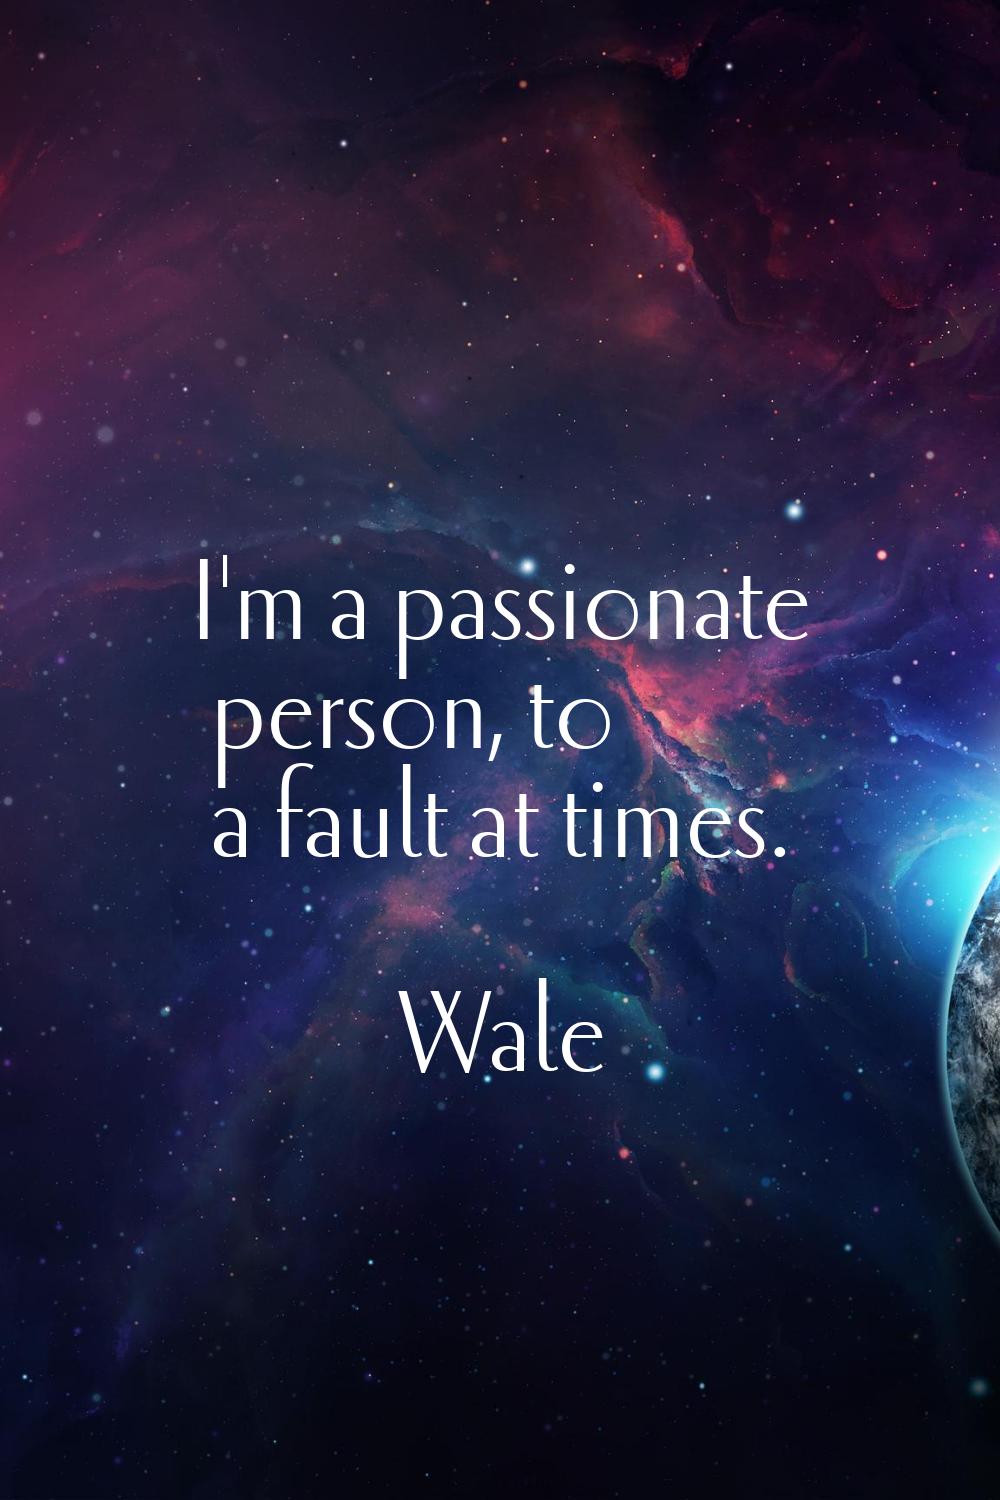 I'm a passionate person, to a fault at times.